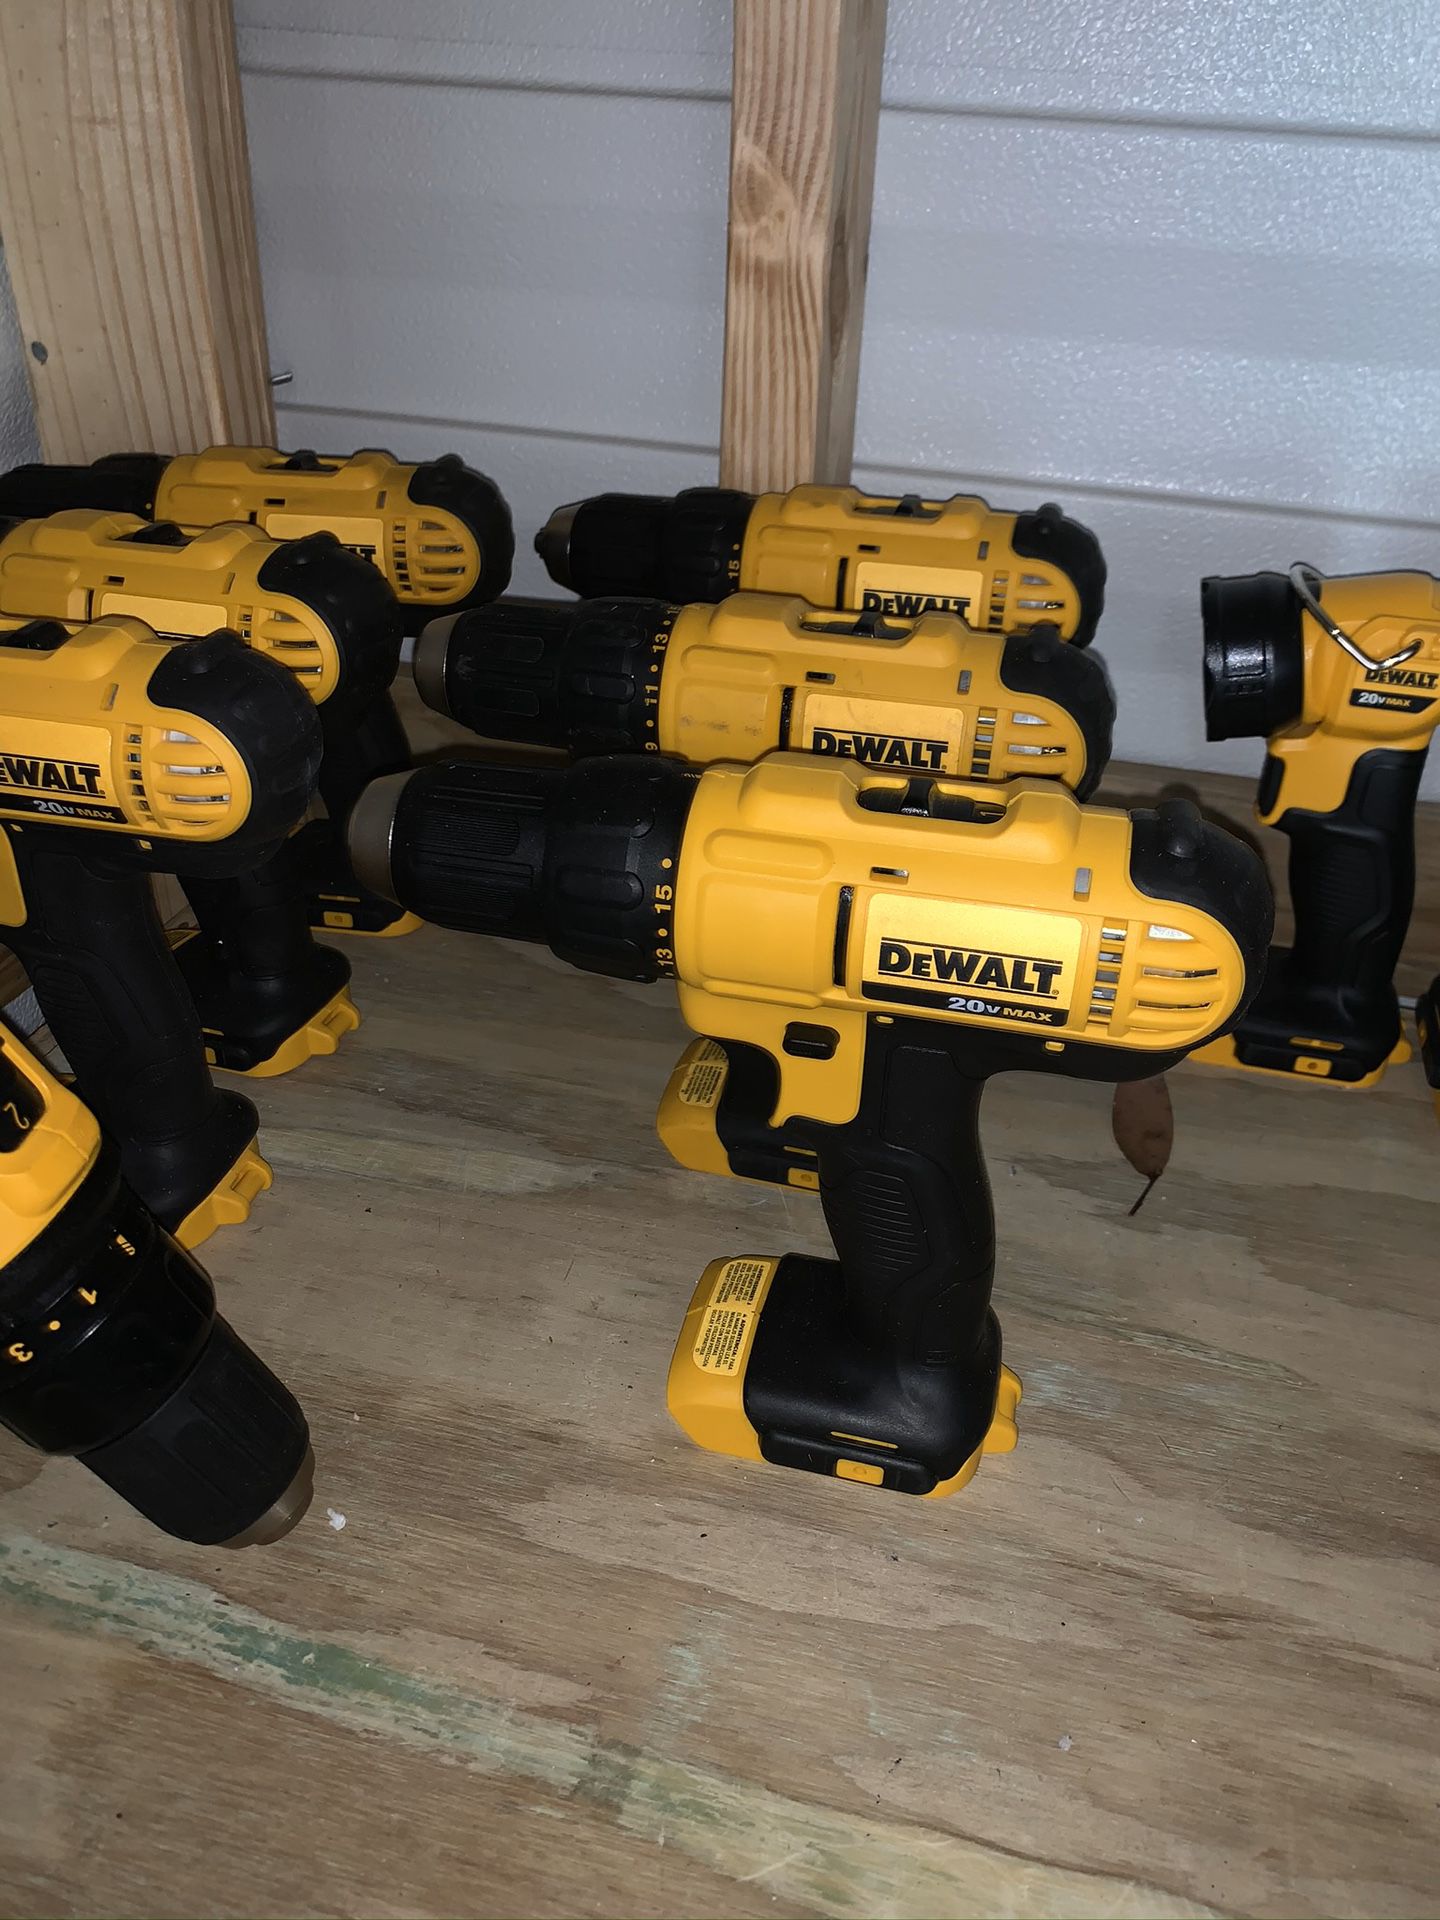 Brand new dewalt 1/2 drill drivers no batteries no charger firm price 40 each